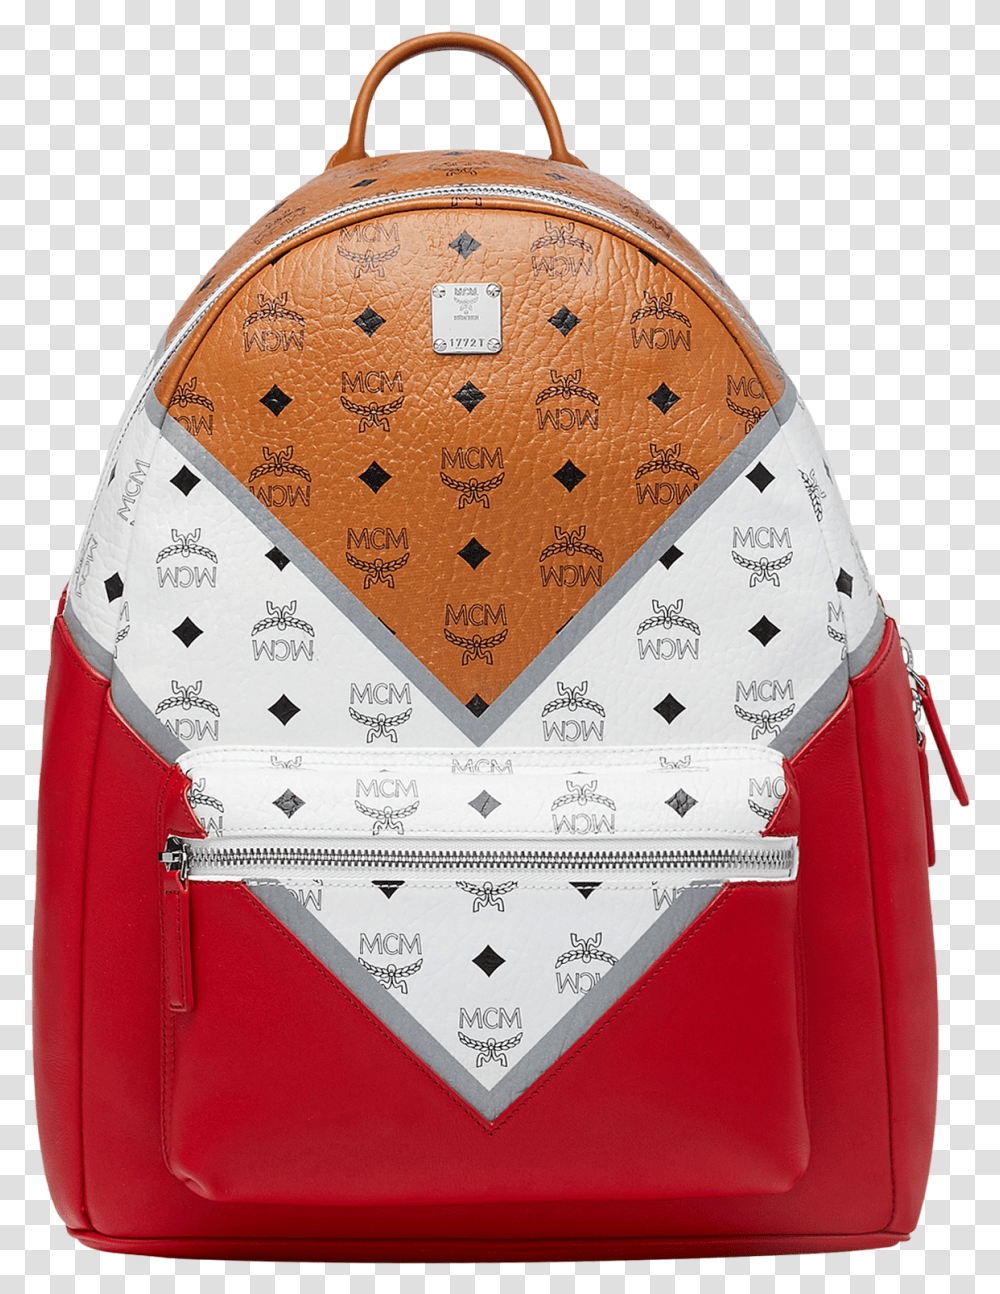 Mcm Backpack Black And Red, Bag, Handbag, Accessories, Accessory Transparent Png